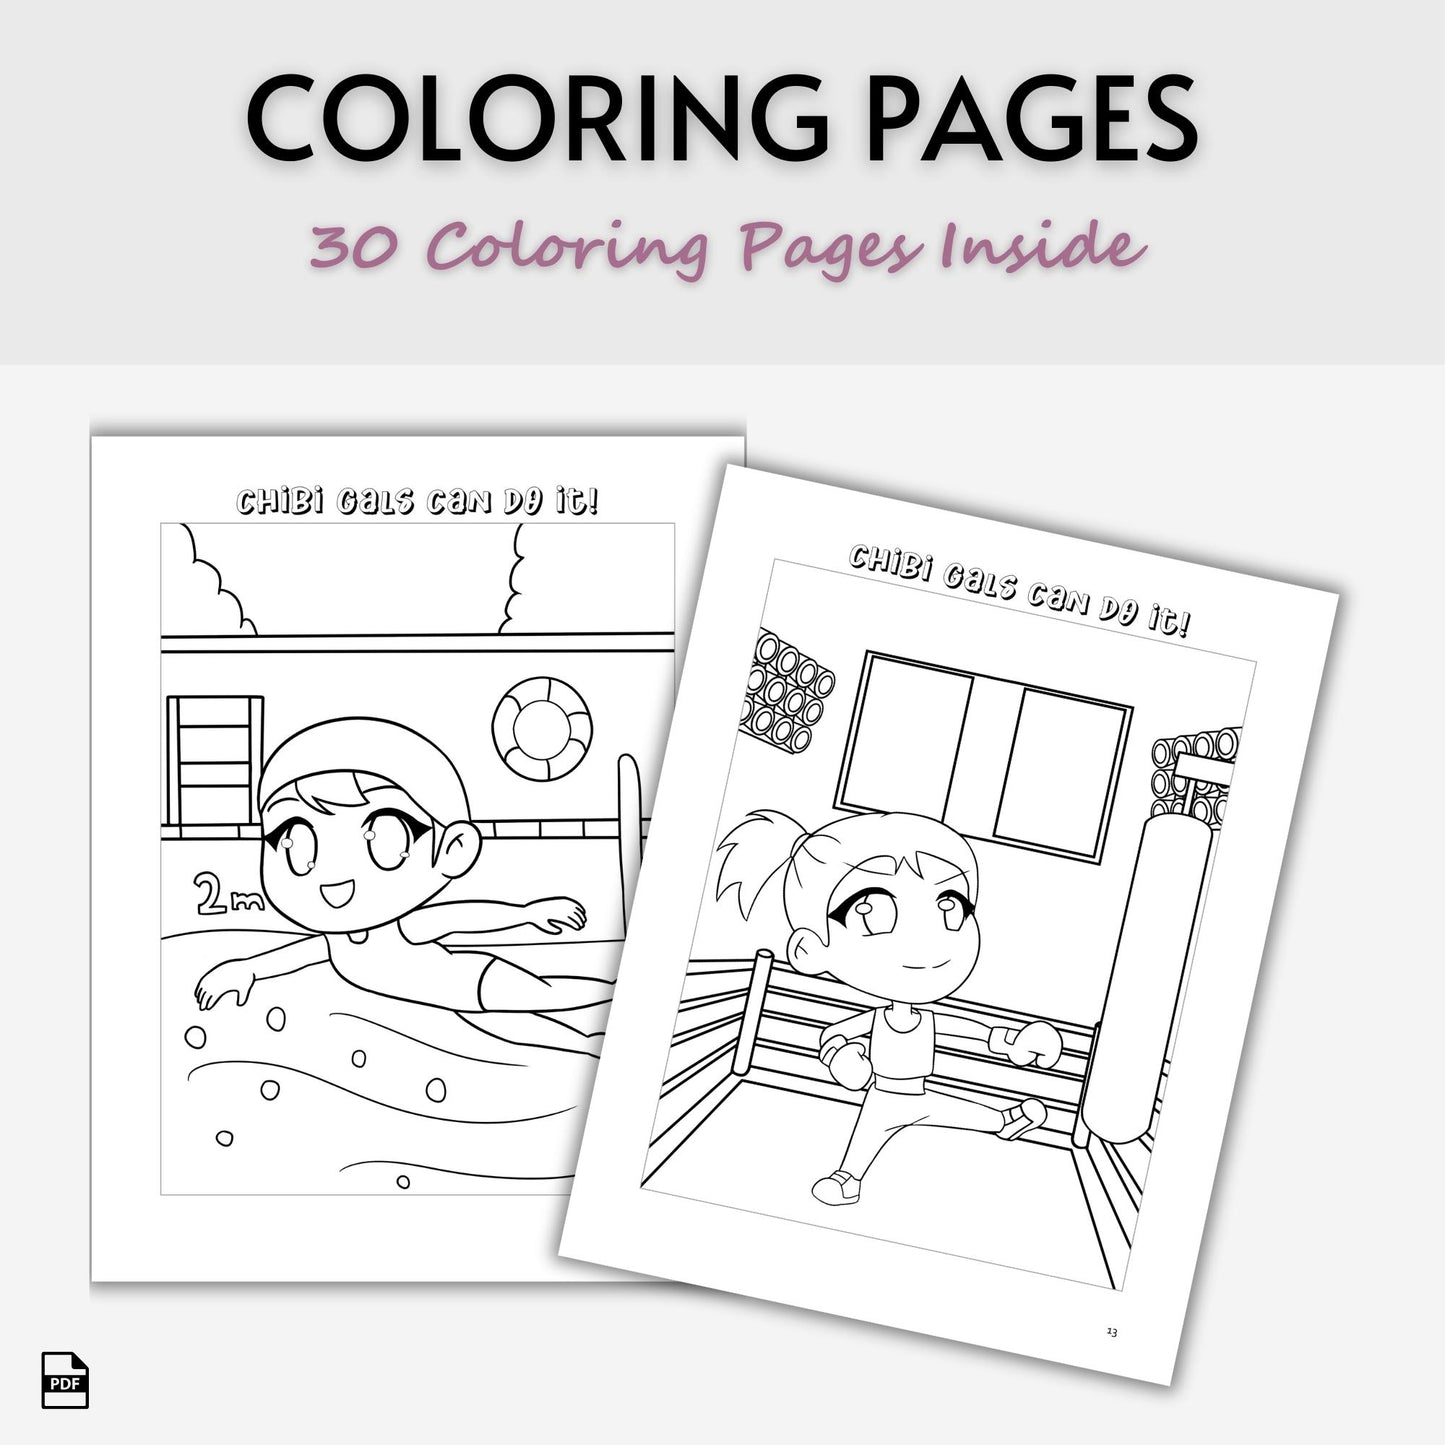 Chibi Gals Can Do It Coloring Book